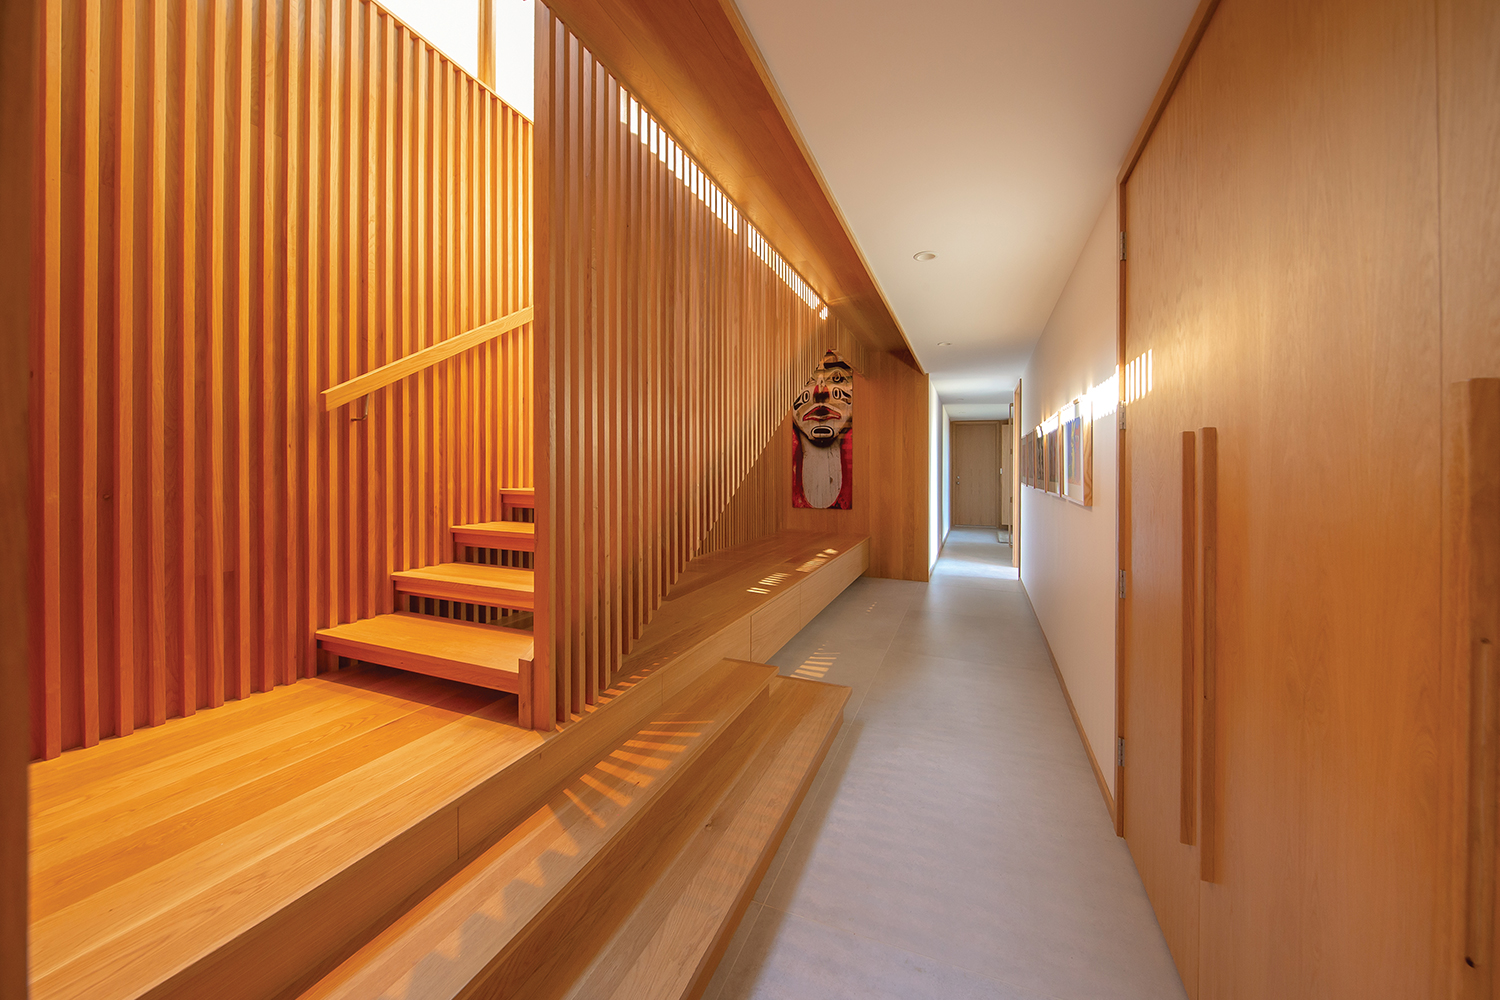 Offering both privacy and transparency, wood slats provide window screening